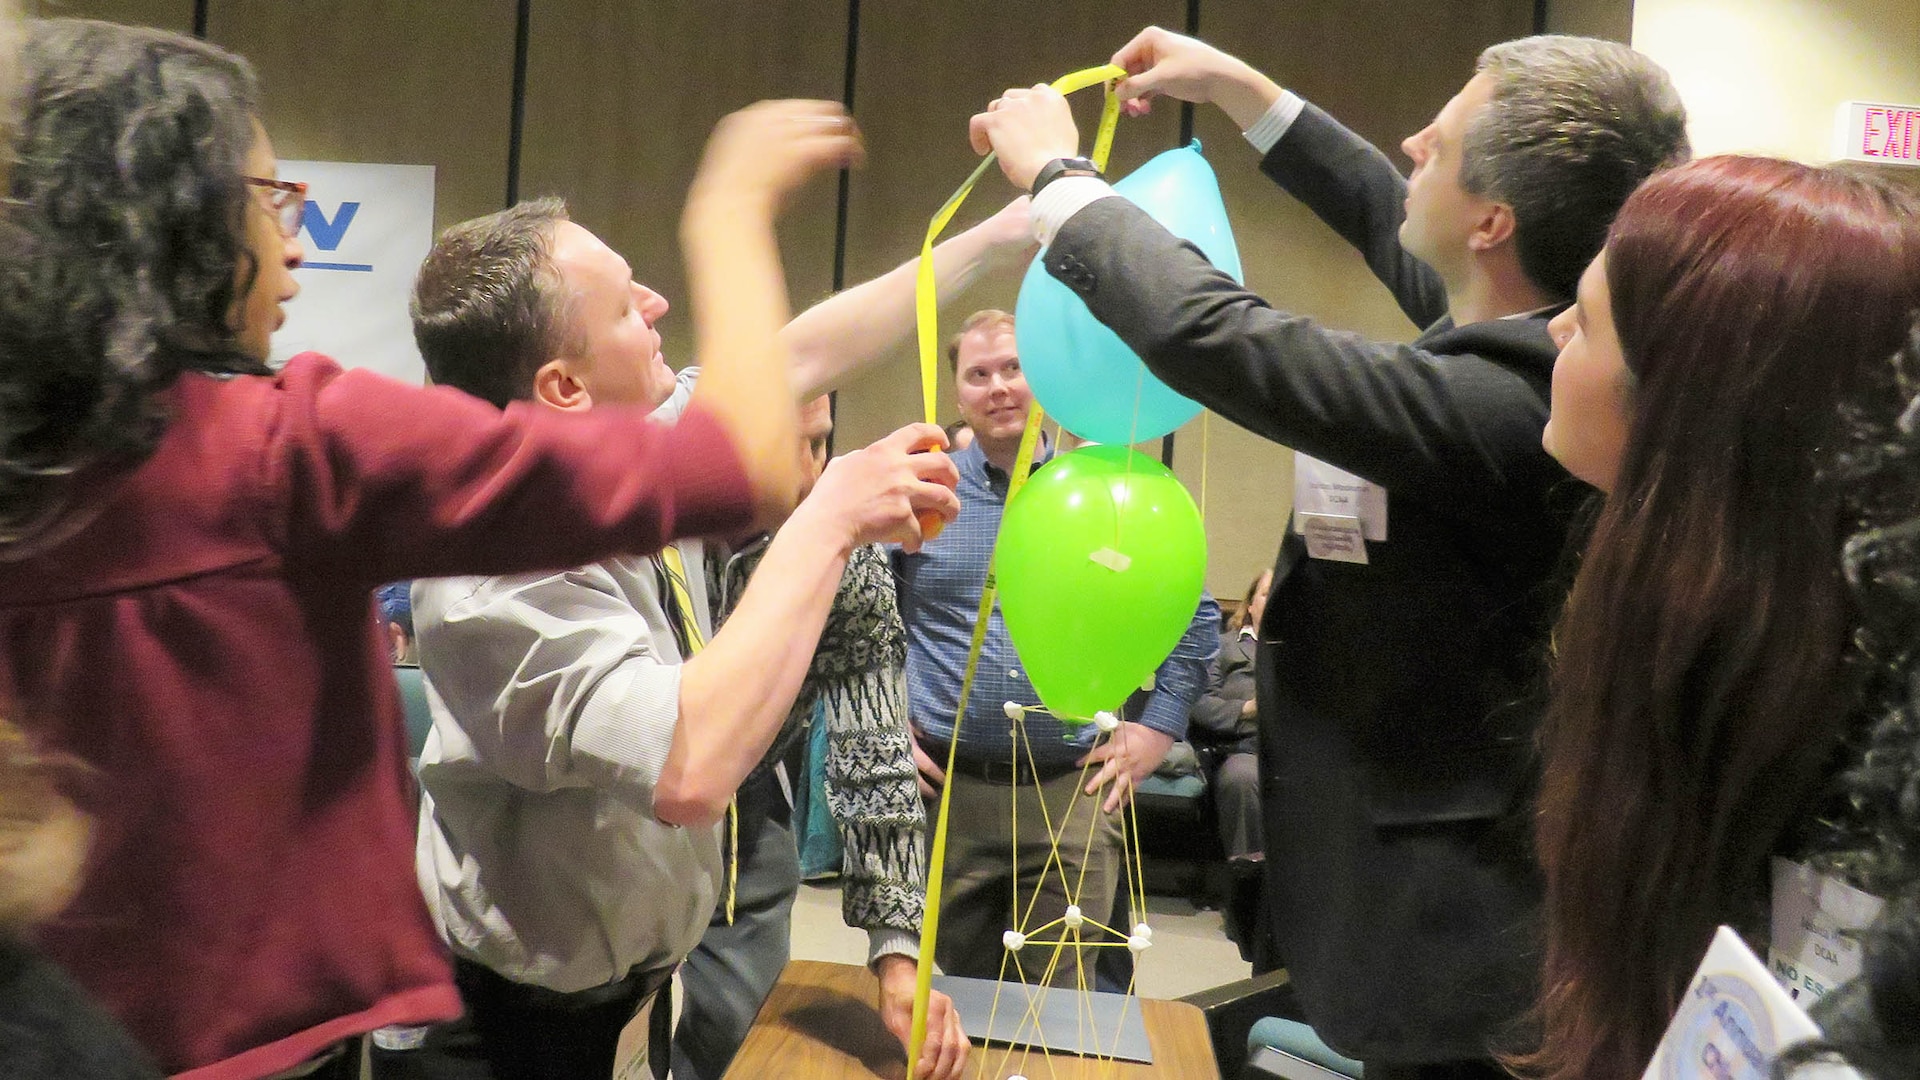 DCMA and DCAA employees build a tower with string and ballons as a team-building exercise.